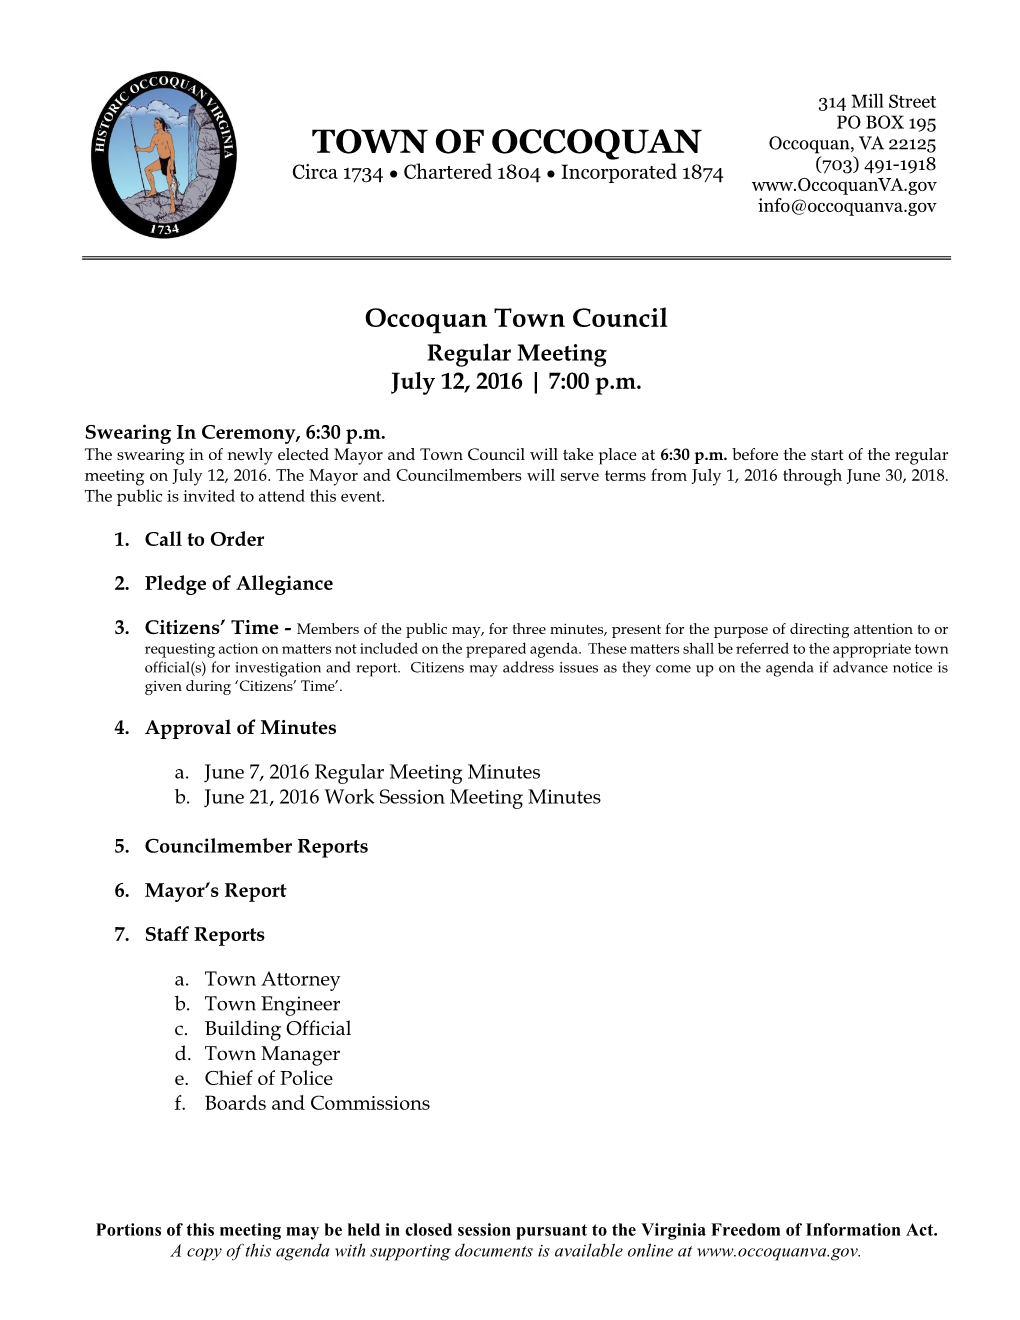 TOWN of OCCOQUAN TOWN COUNCIL MEETING Agenda Communication